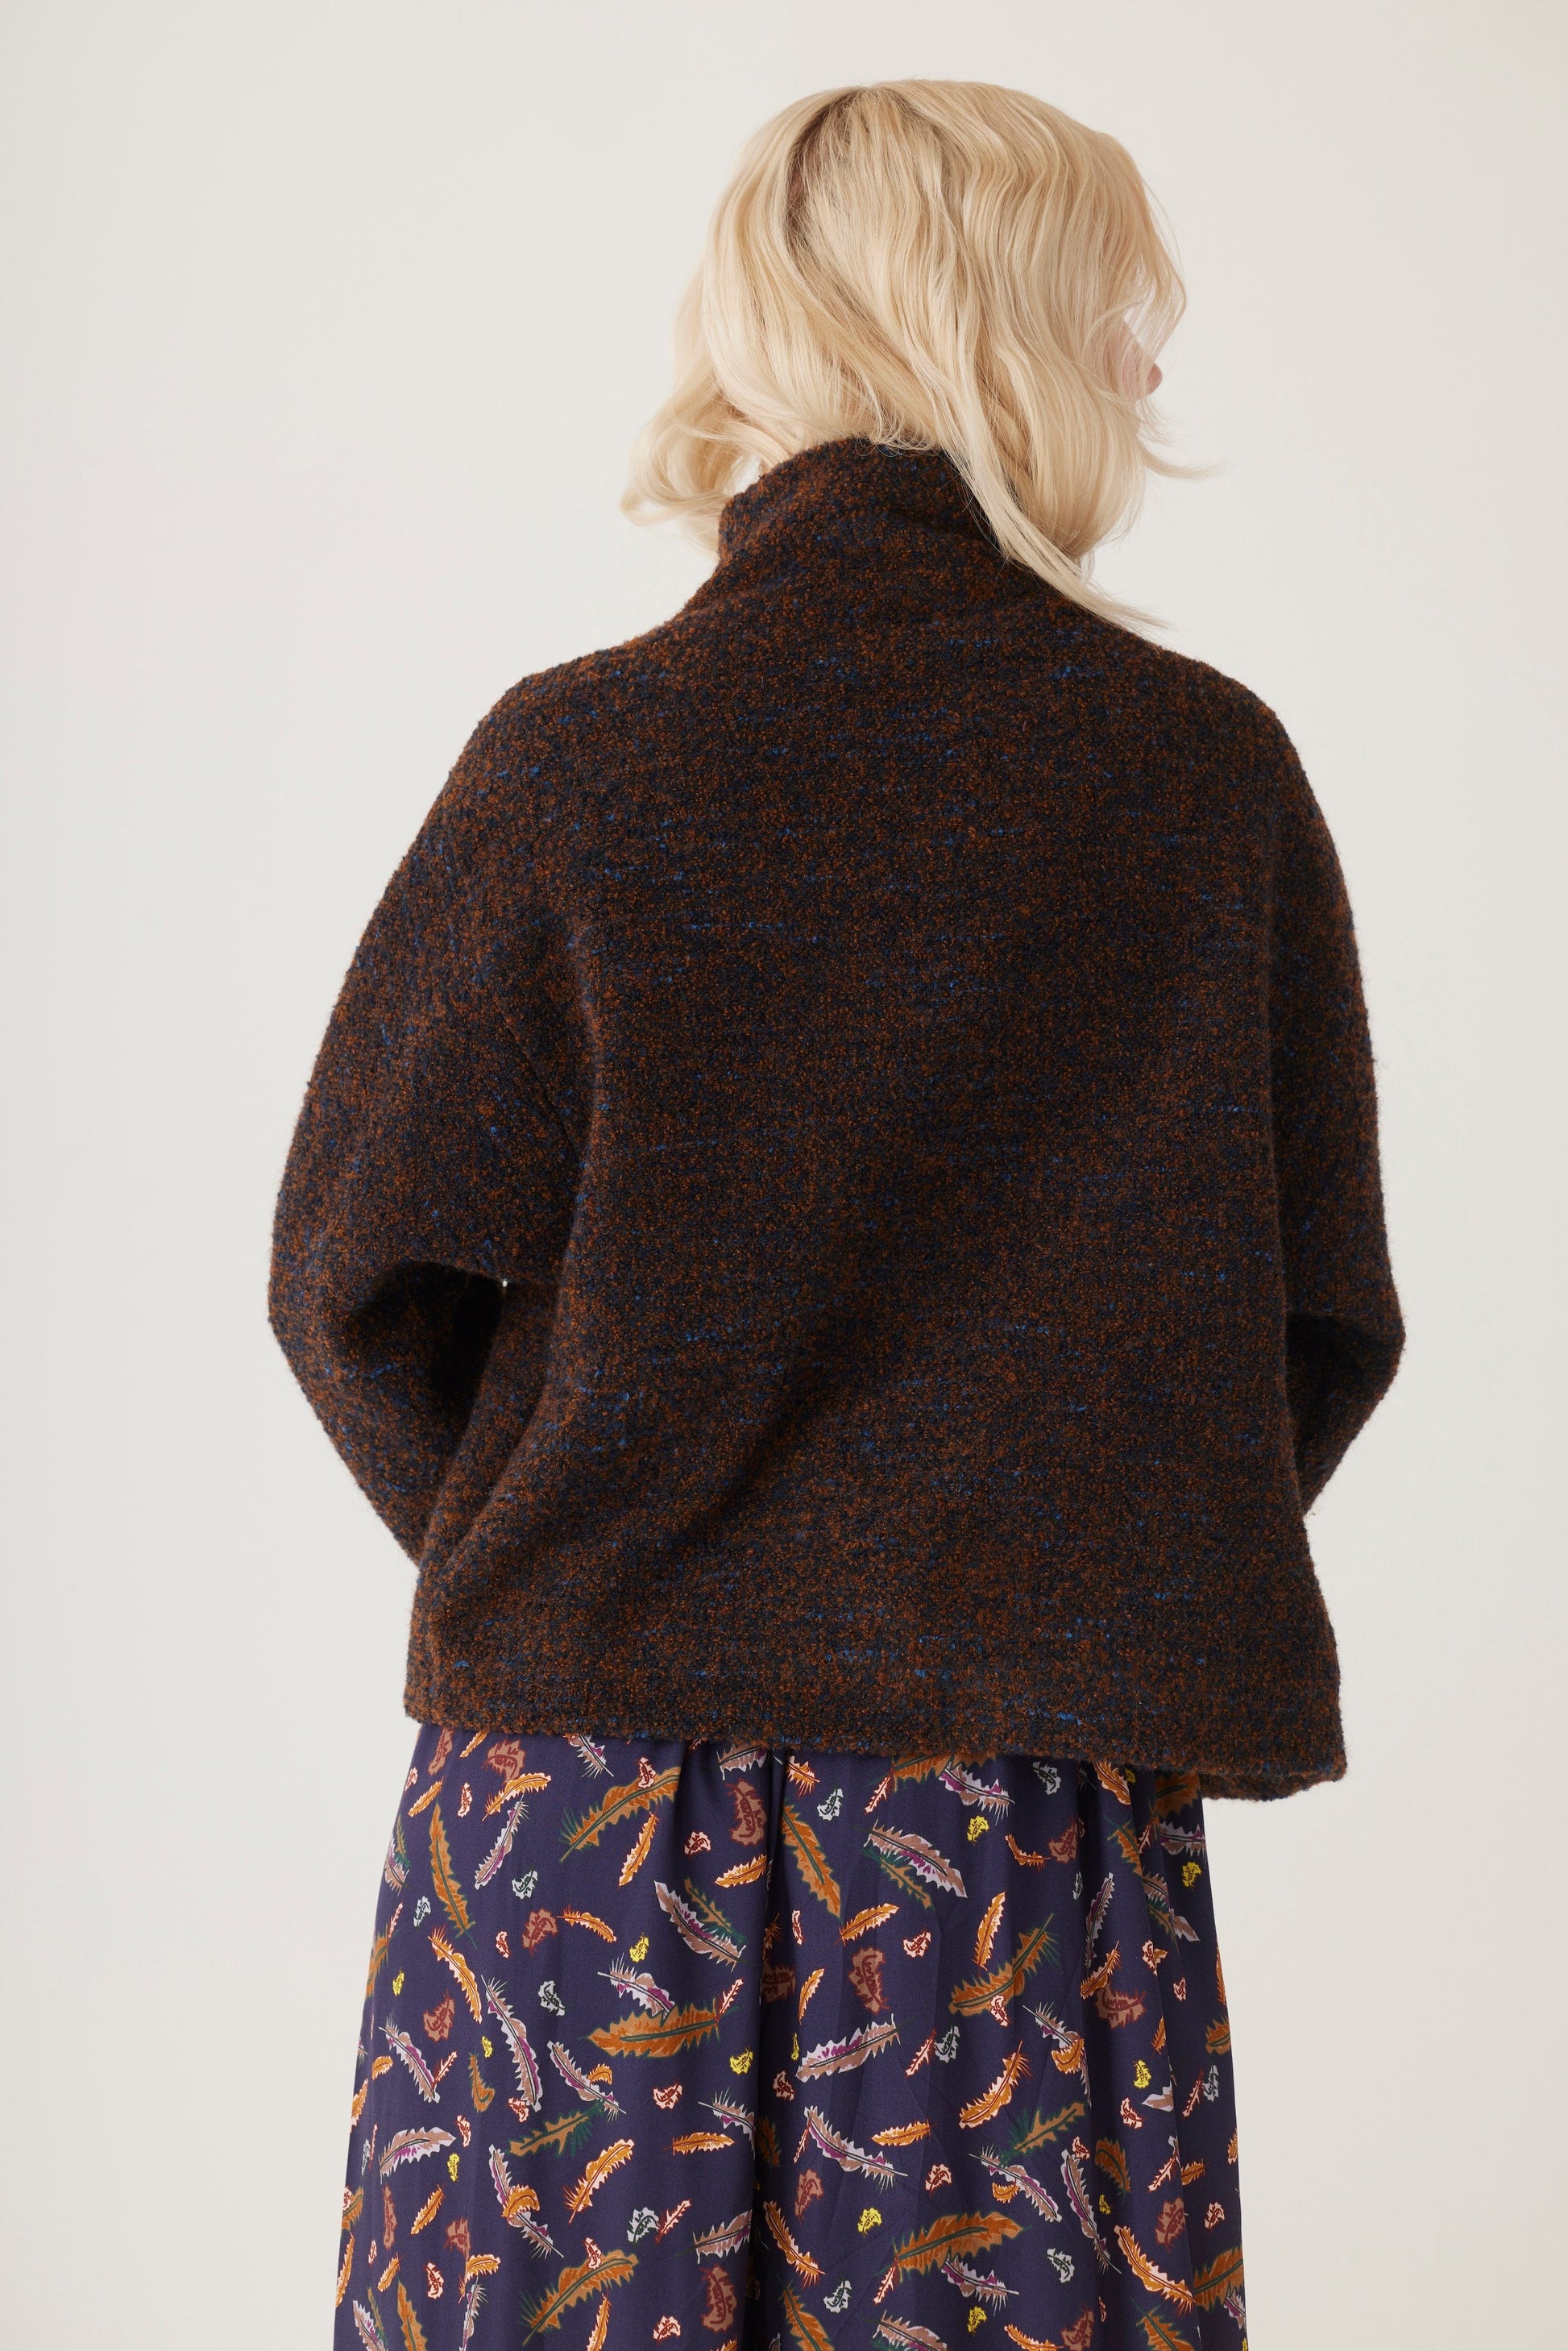 Jacquie Jacket in Boucle Wool Coat CHRISTINE ALCALAY   